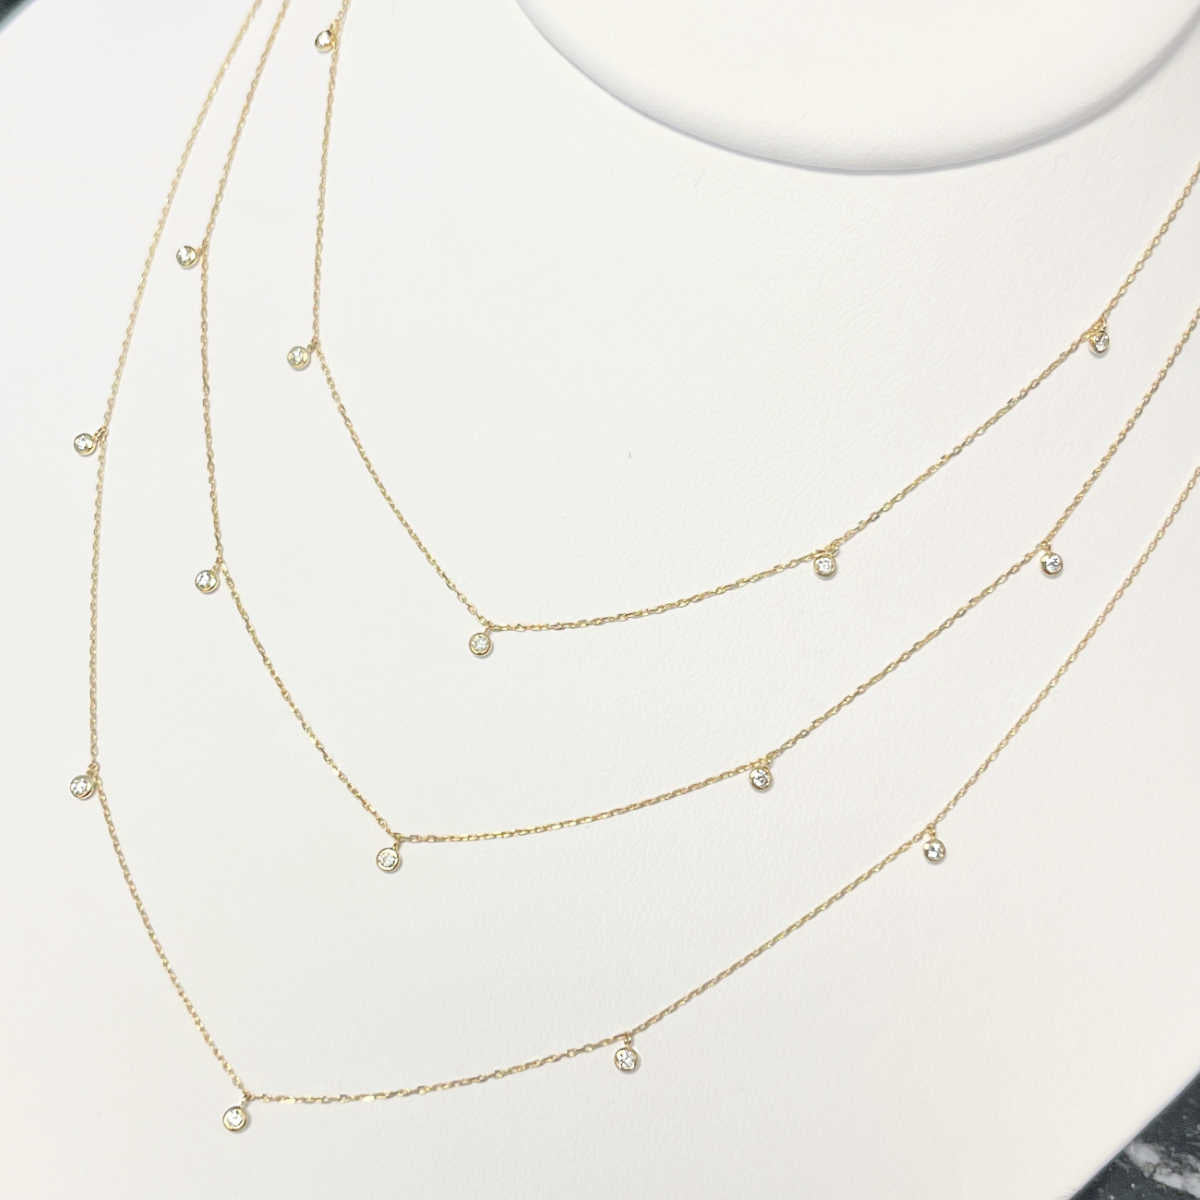 Diamond Dangle Station Necklace | Dainty Diamonds by the Yard Style | 14K Gold Layered Chains from Two of Most